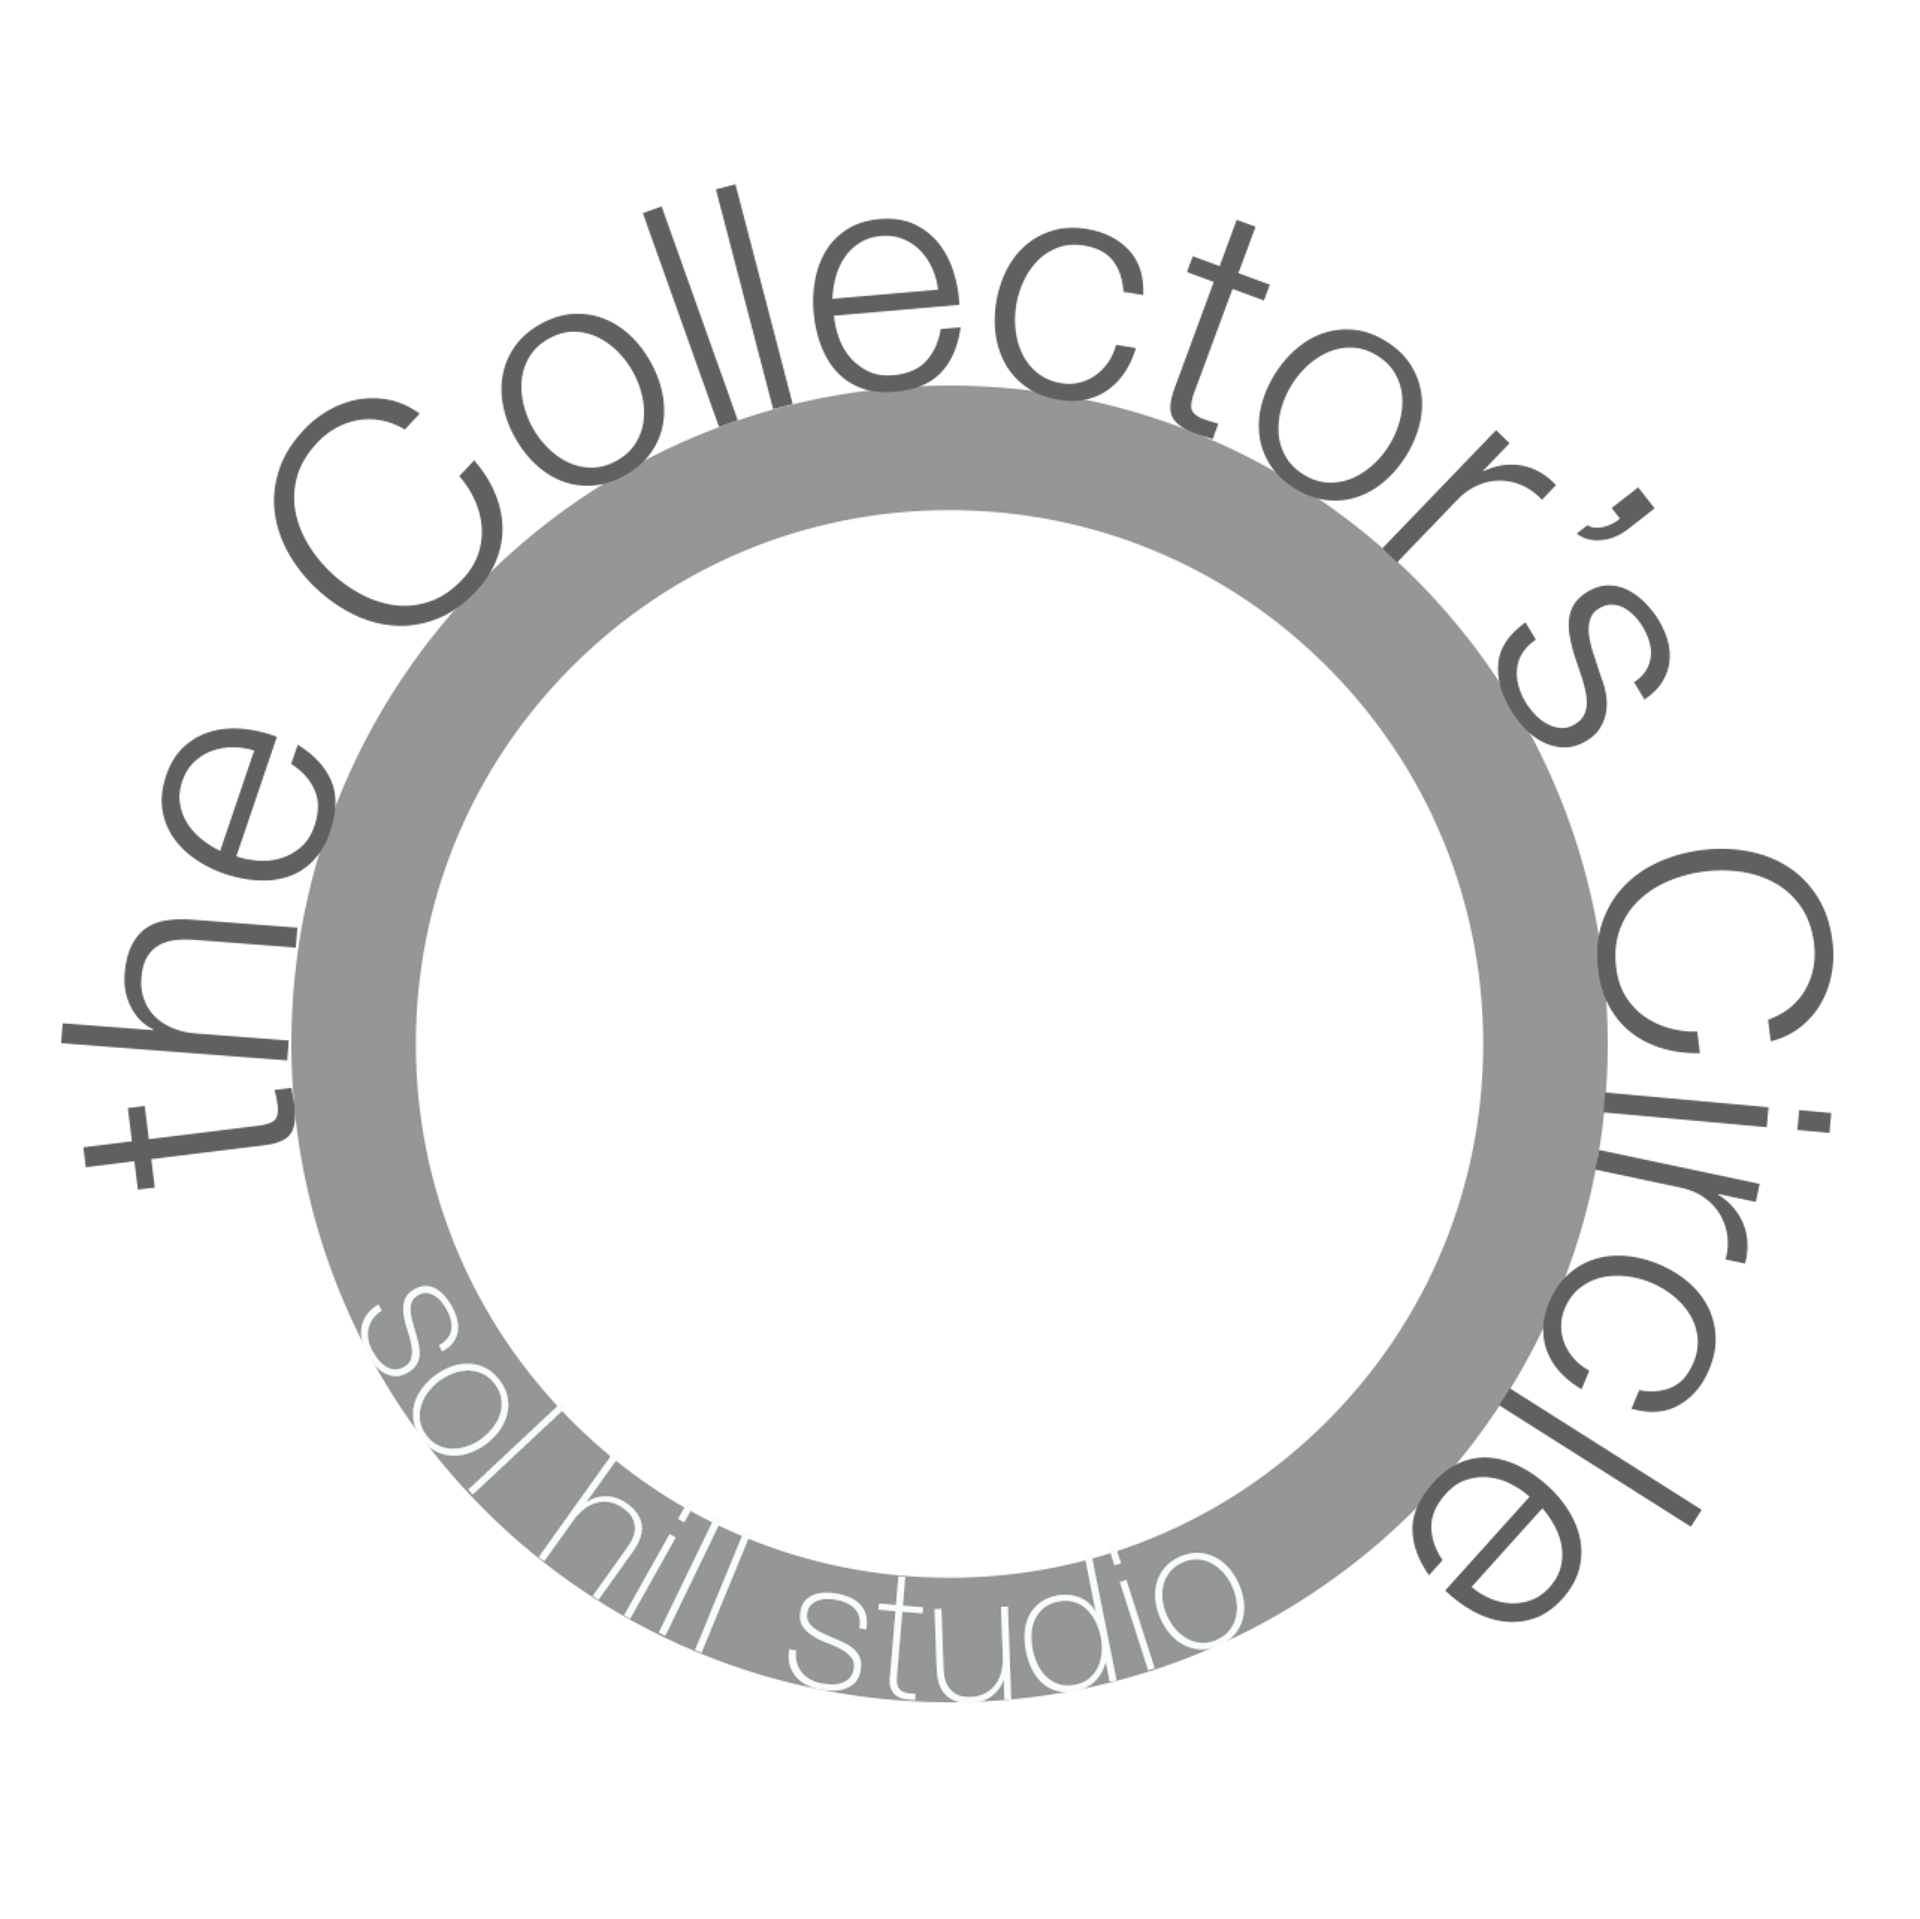 Collector's Circle Fee by Sol Hill